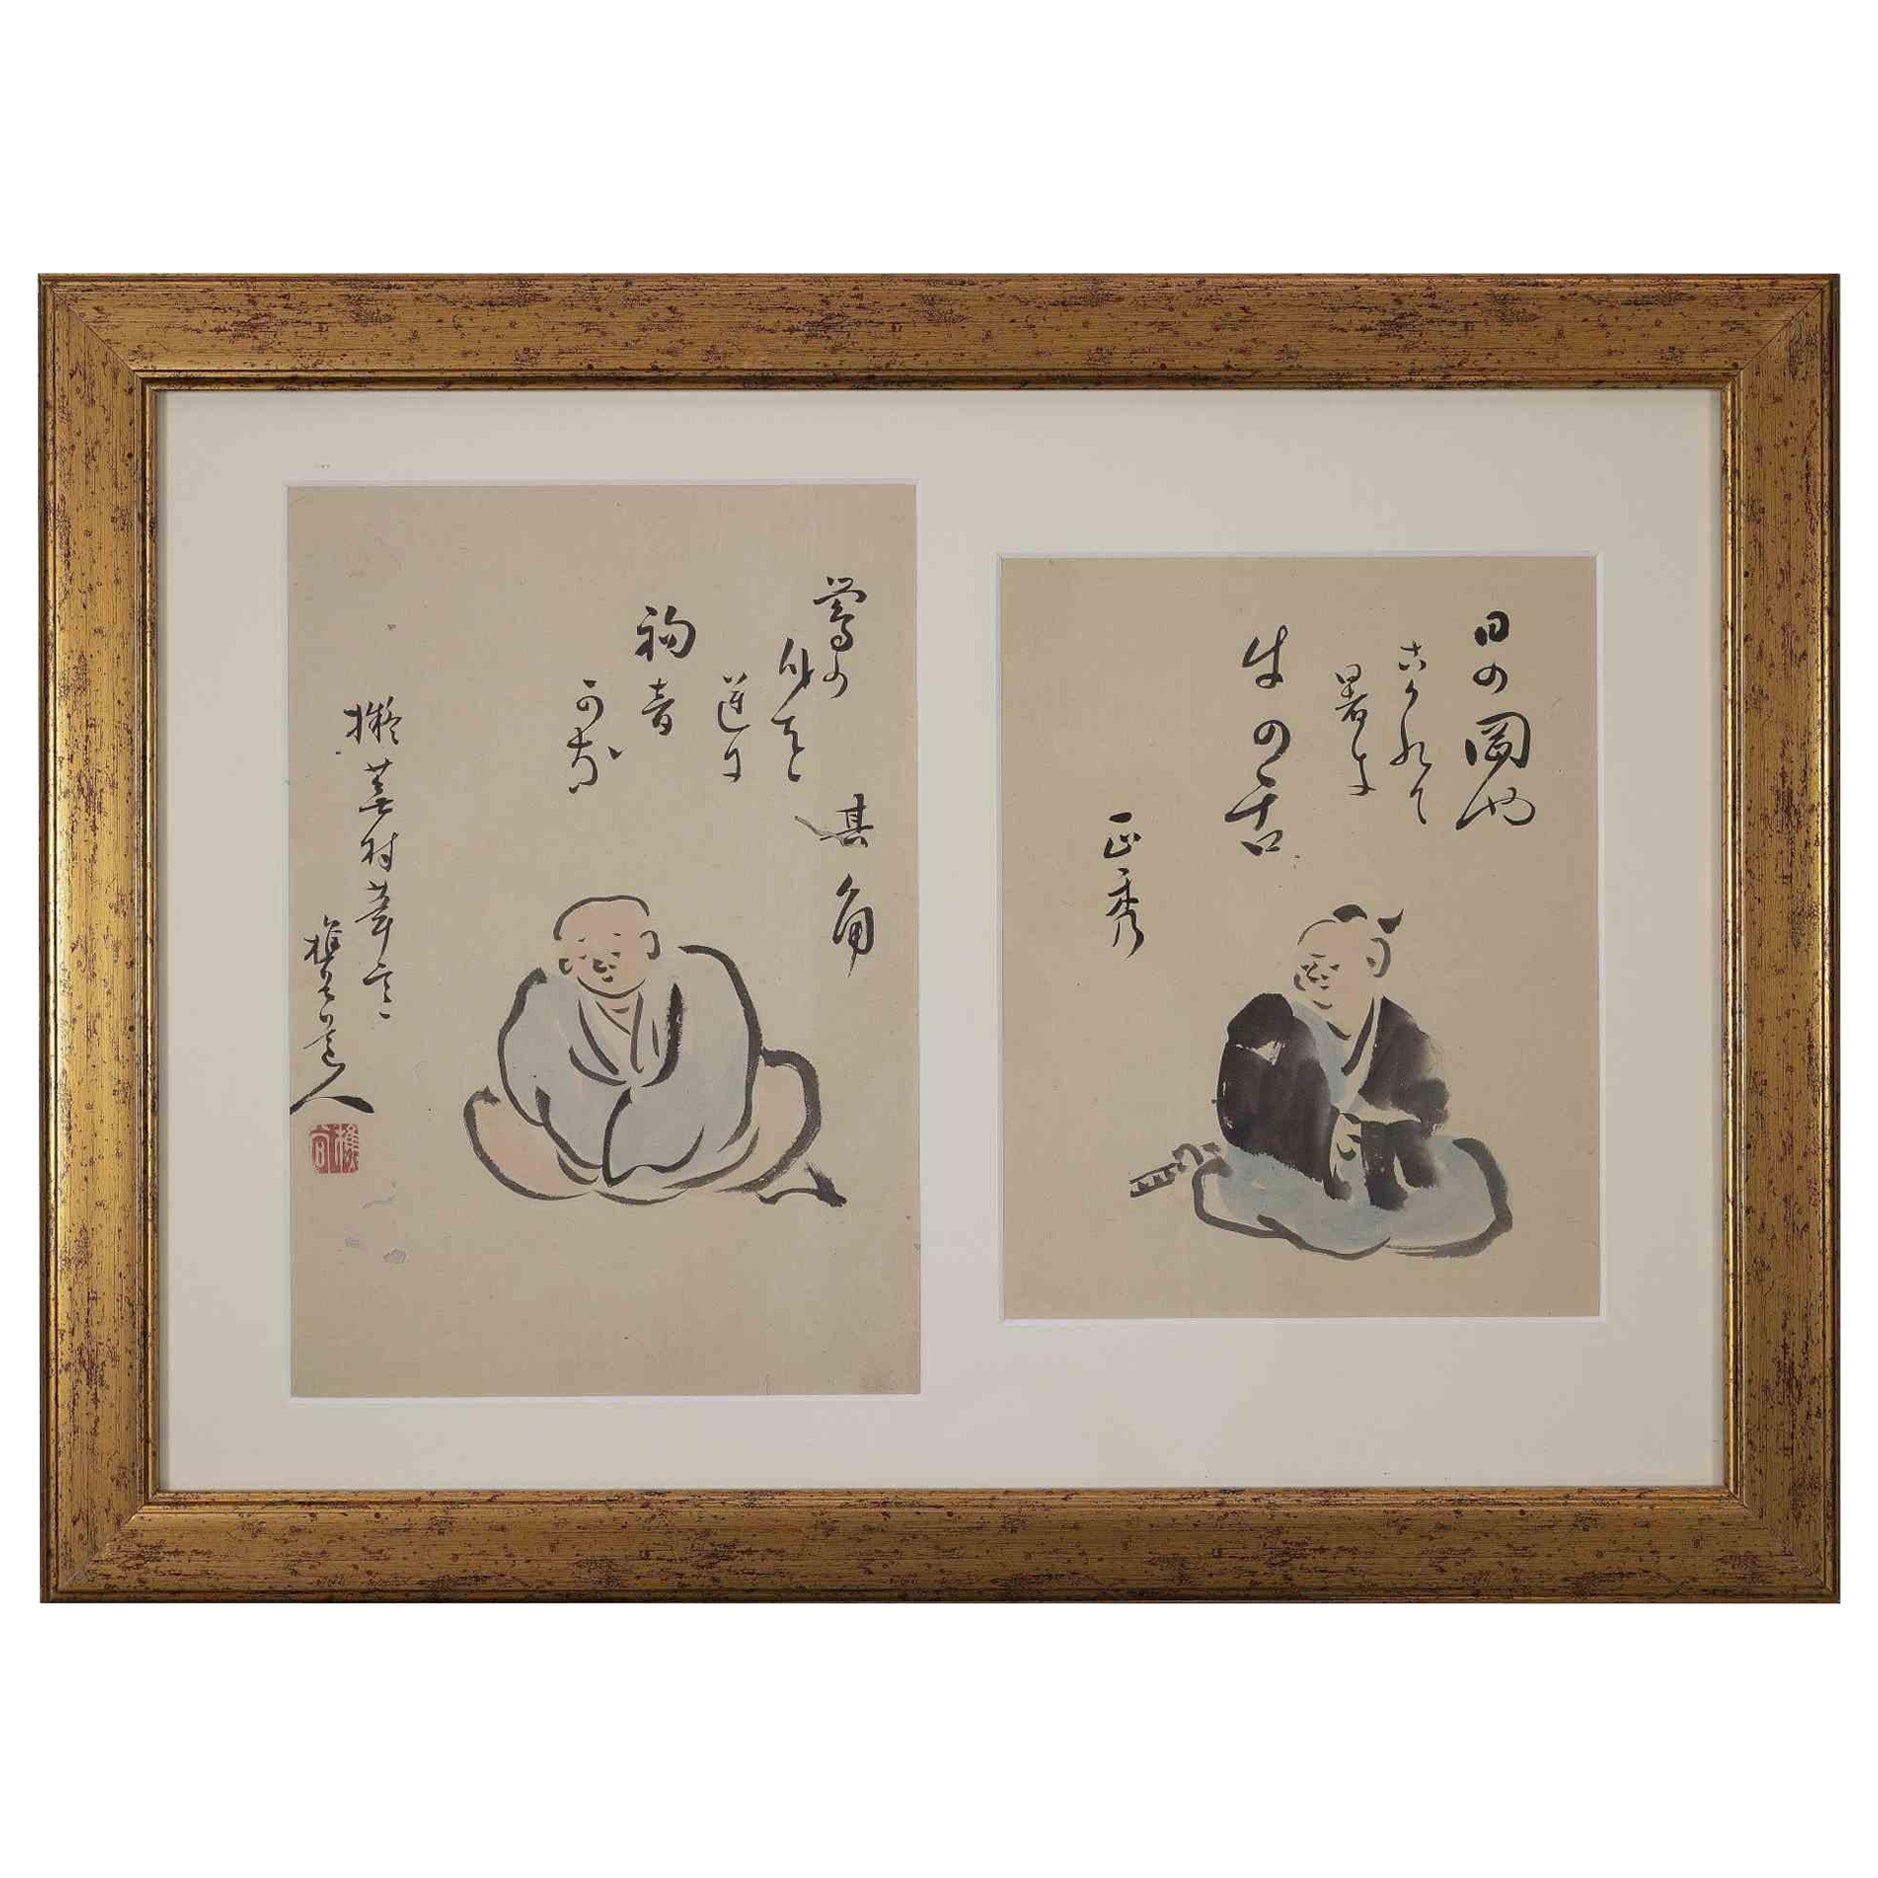 Unknown Figurative Art - Pair of Oriental Figures - Watercolor Drawing - 19th Century